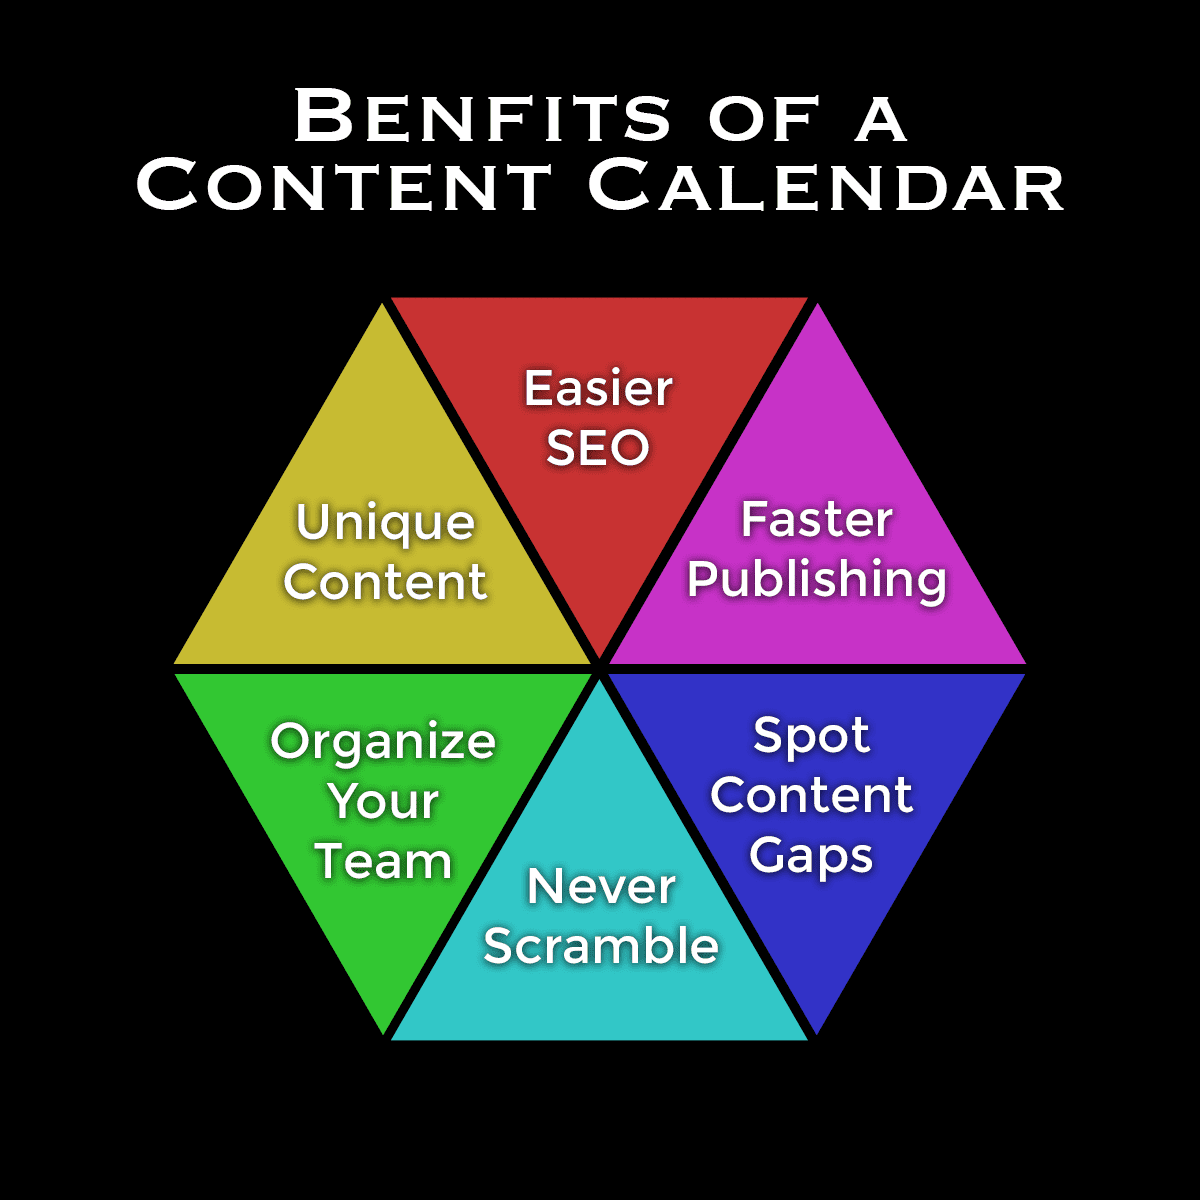 A Content Calendar can provide a number of valuable benefits to your blog!